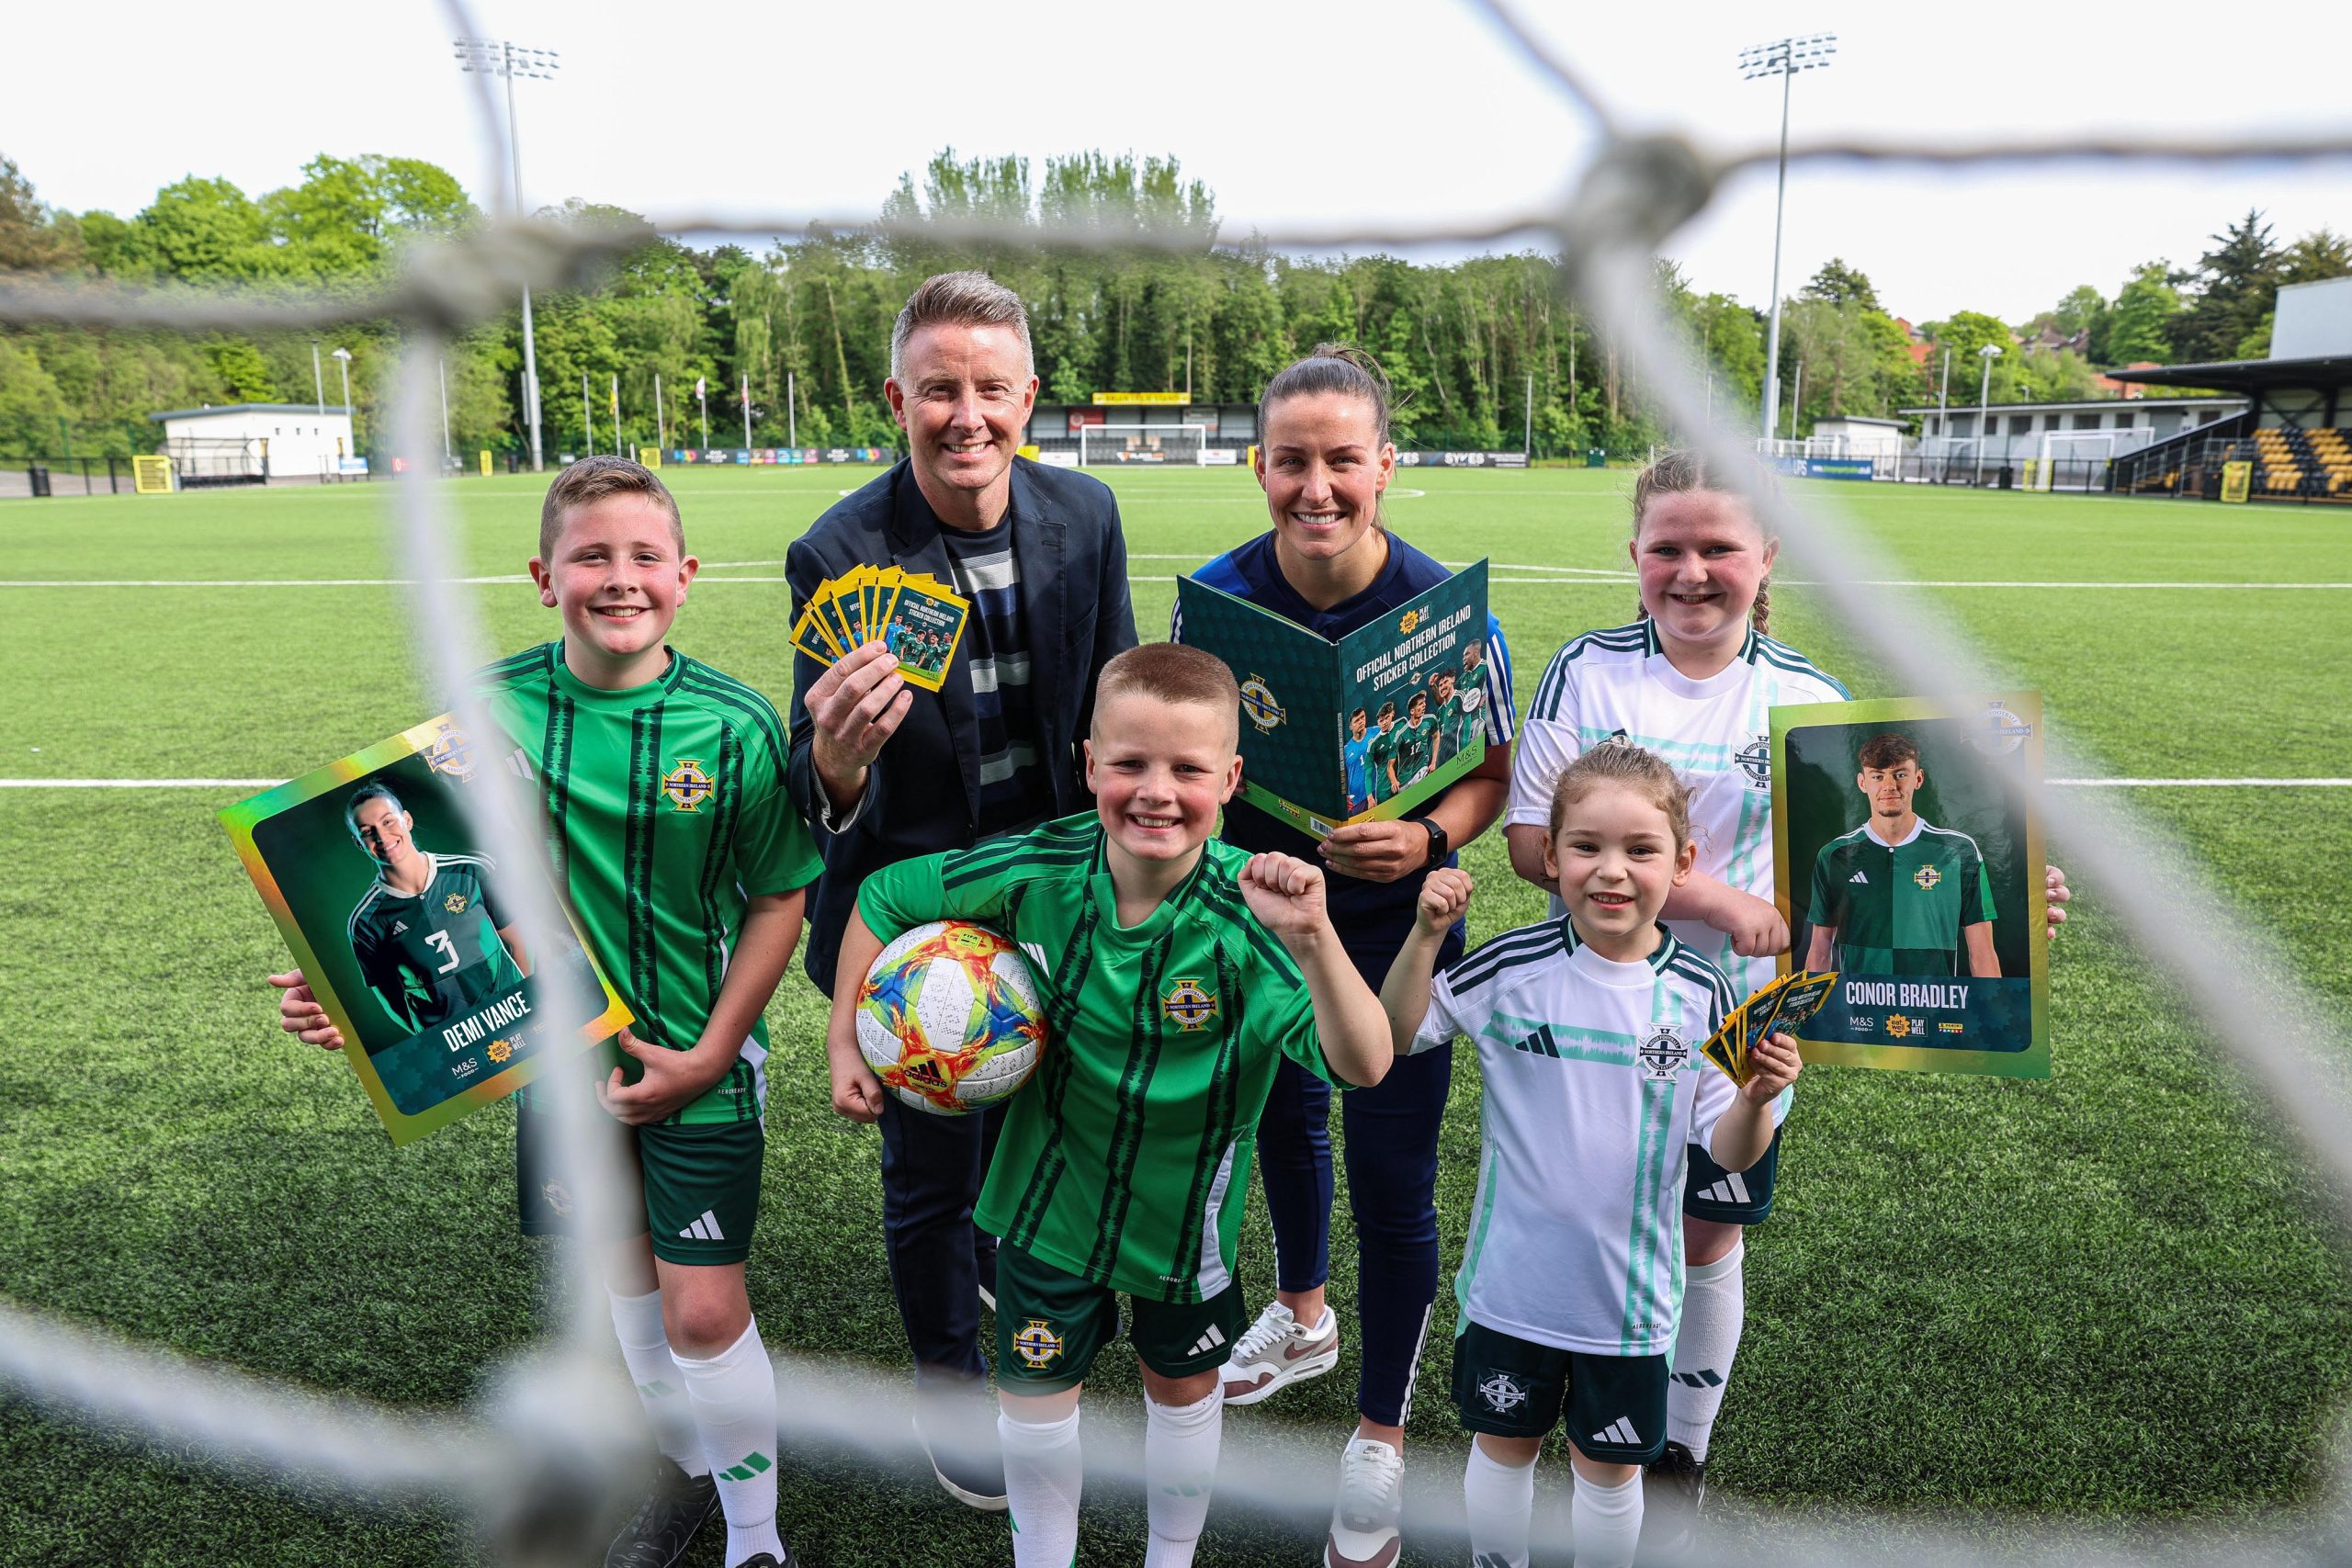 M&S Food teams up with Panini to launch NI football sticker collection